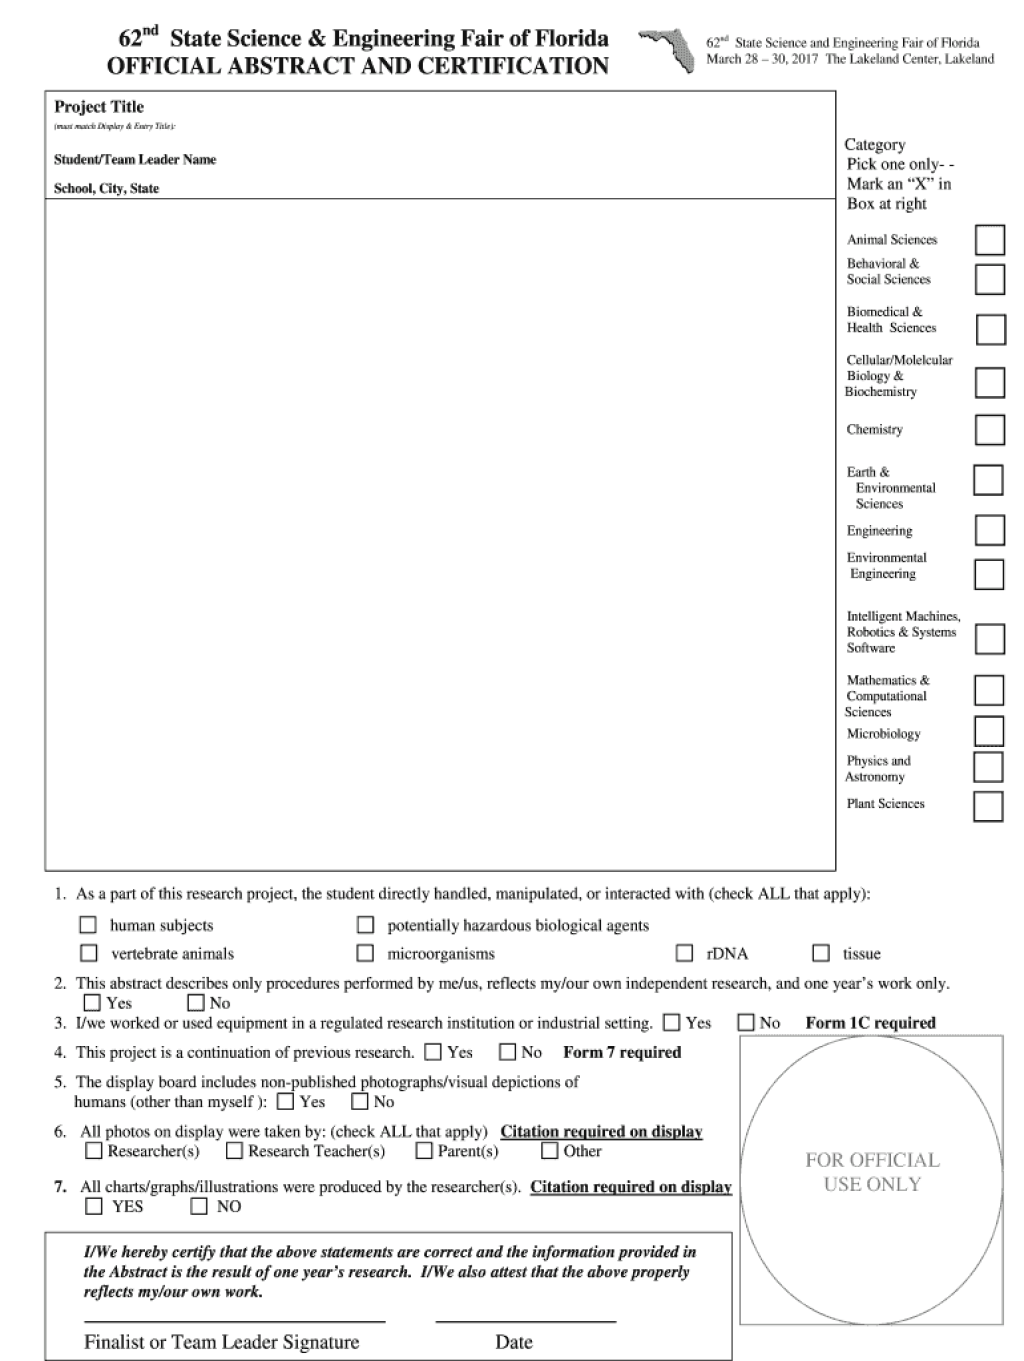 Picture of: Official abstract form: Fill out & sign online  DocHub